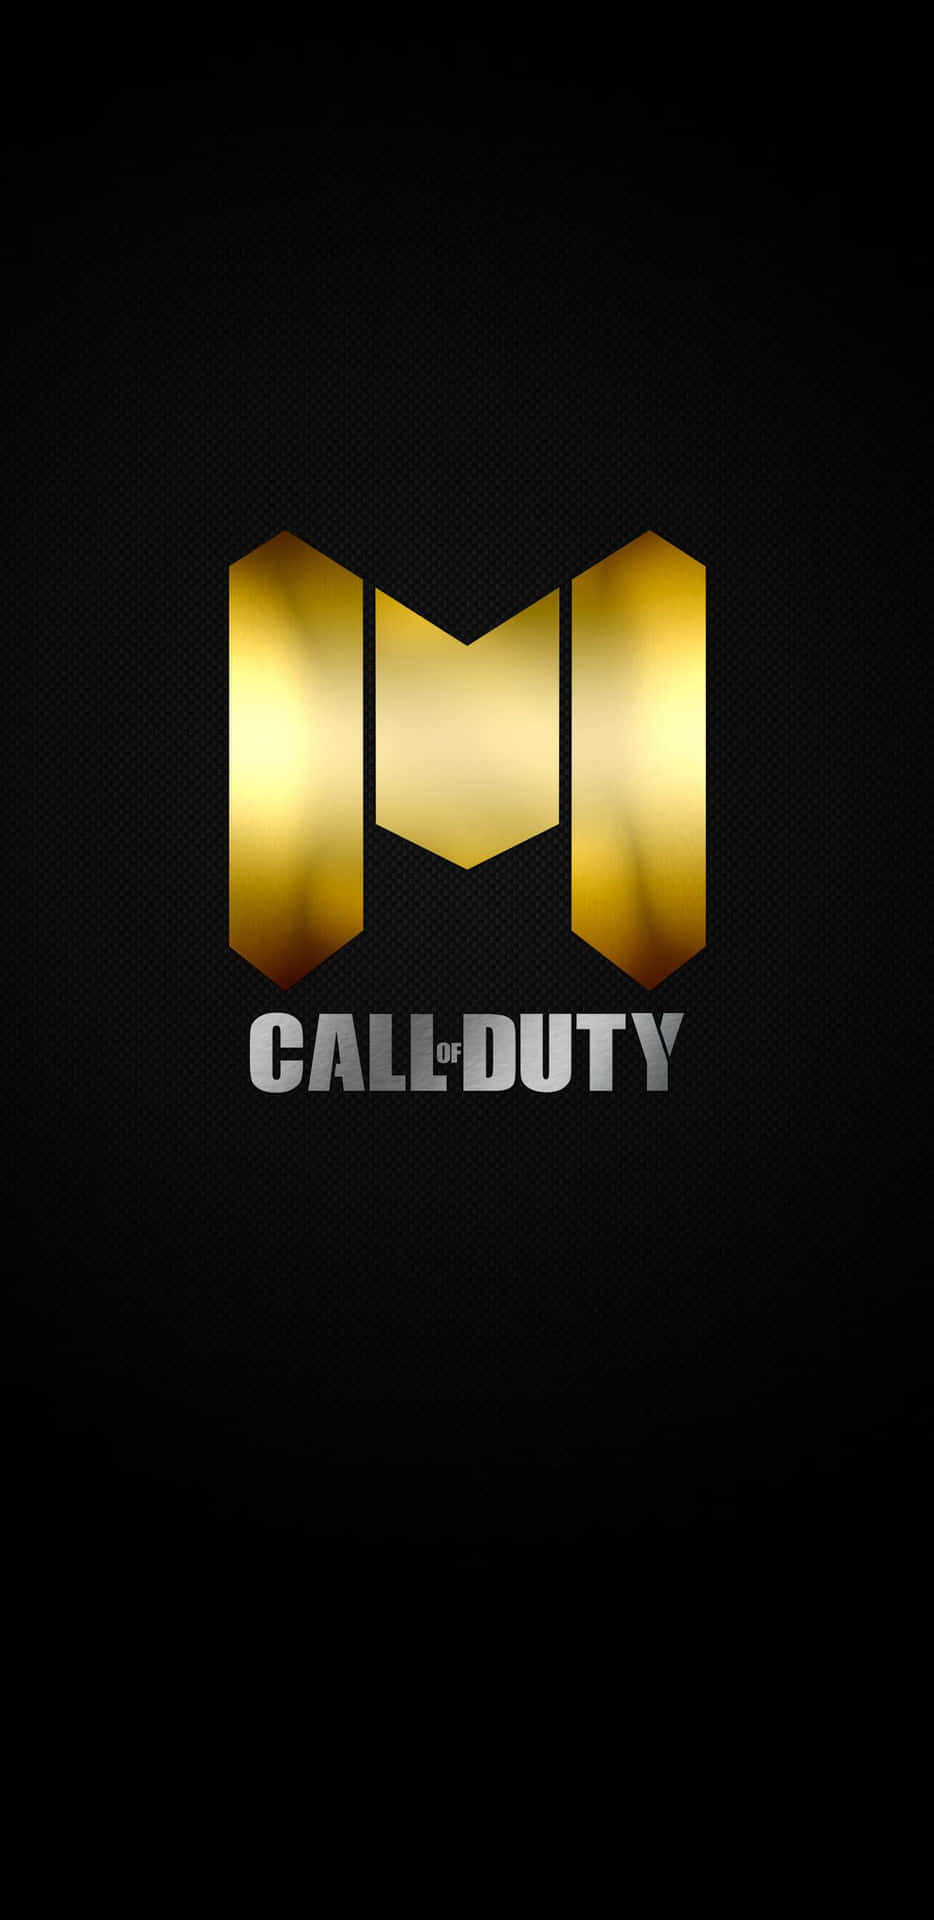 “Change your perspective and gain new insight with Call of Duty”